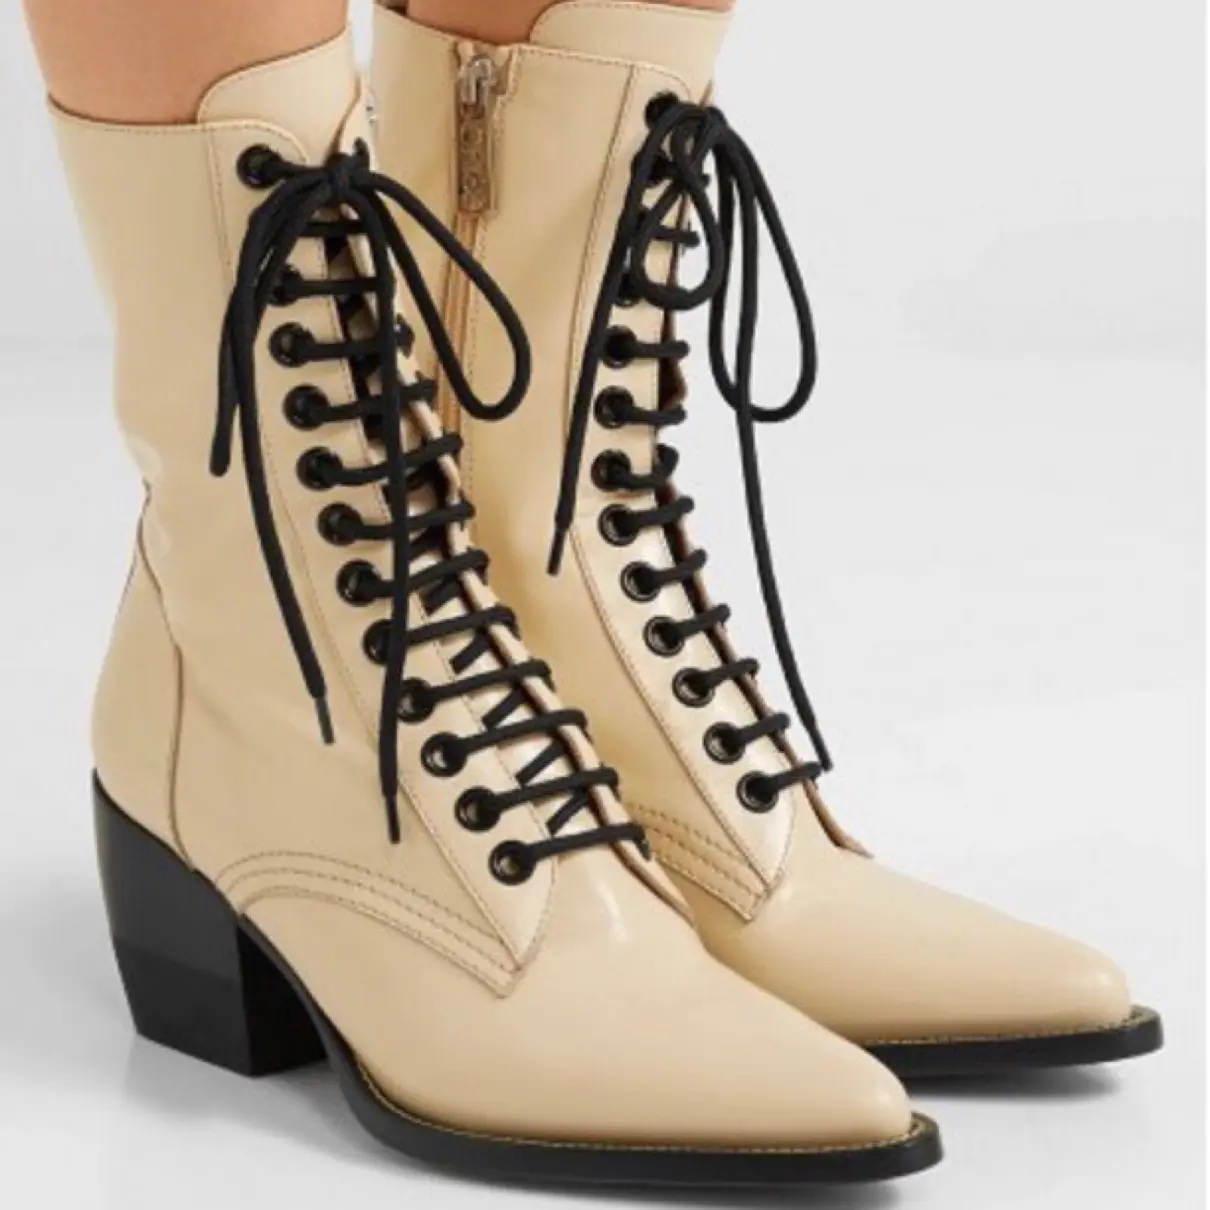 Buy Chloé Rylee leather ankle boots online